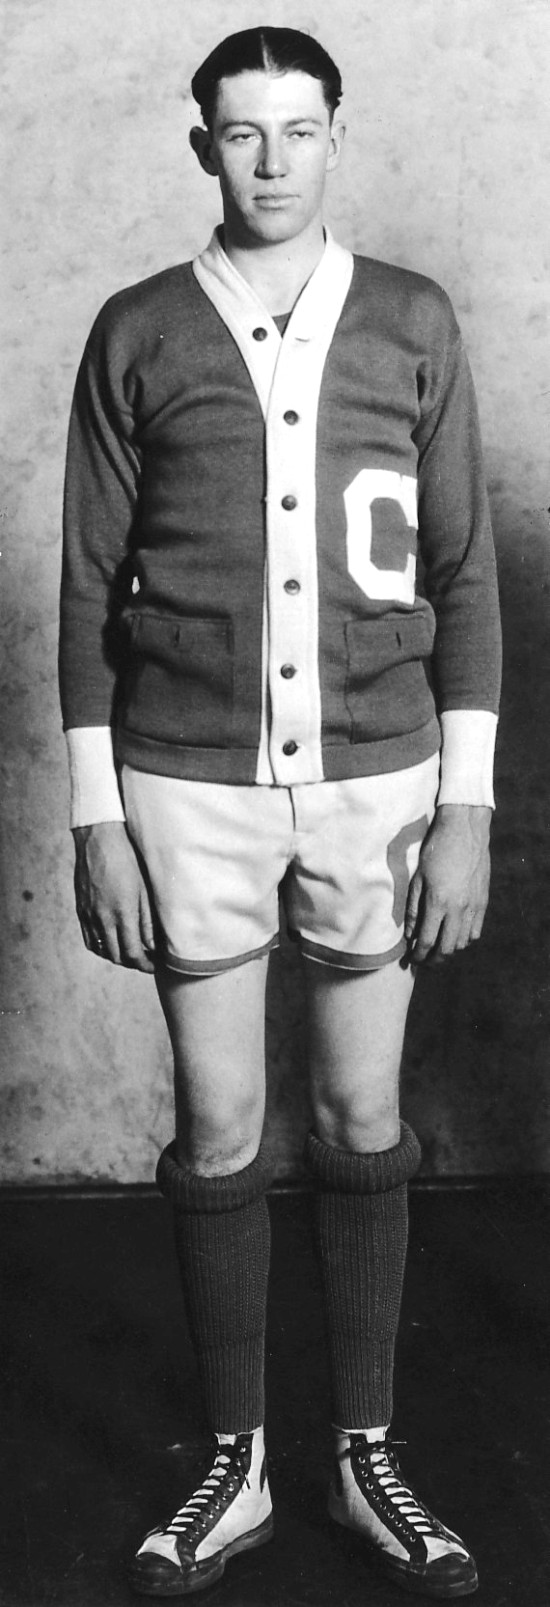 Check out the "Lovely" rolled socks-and-sweater uniform!